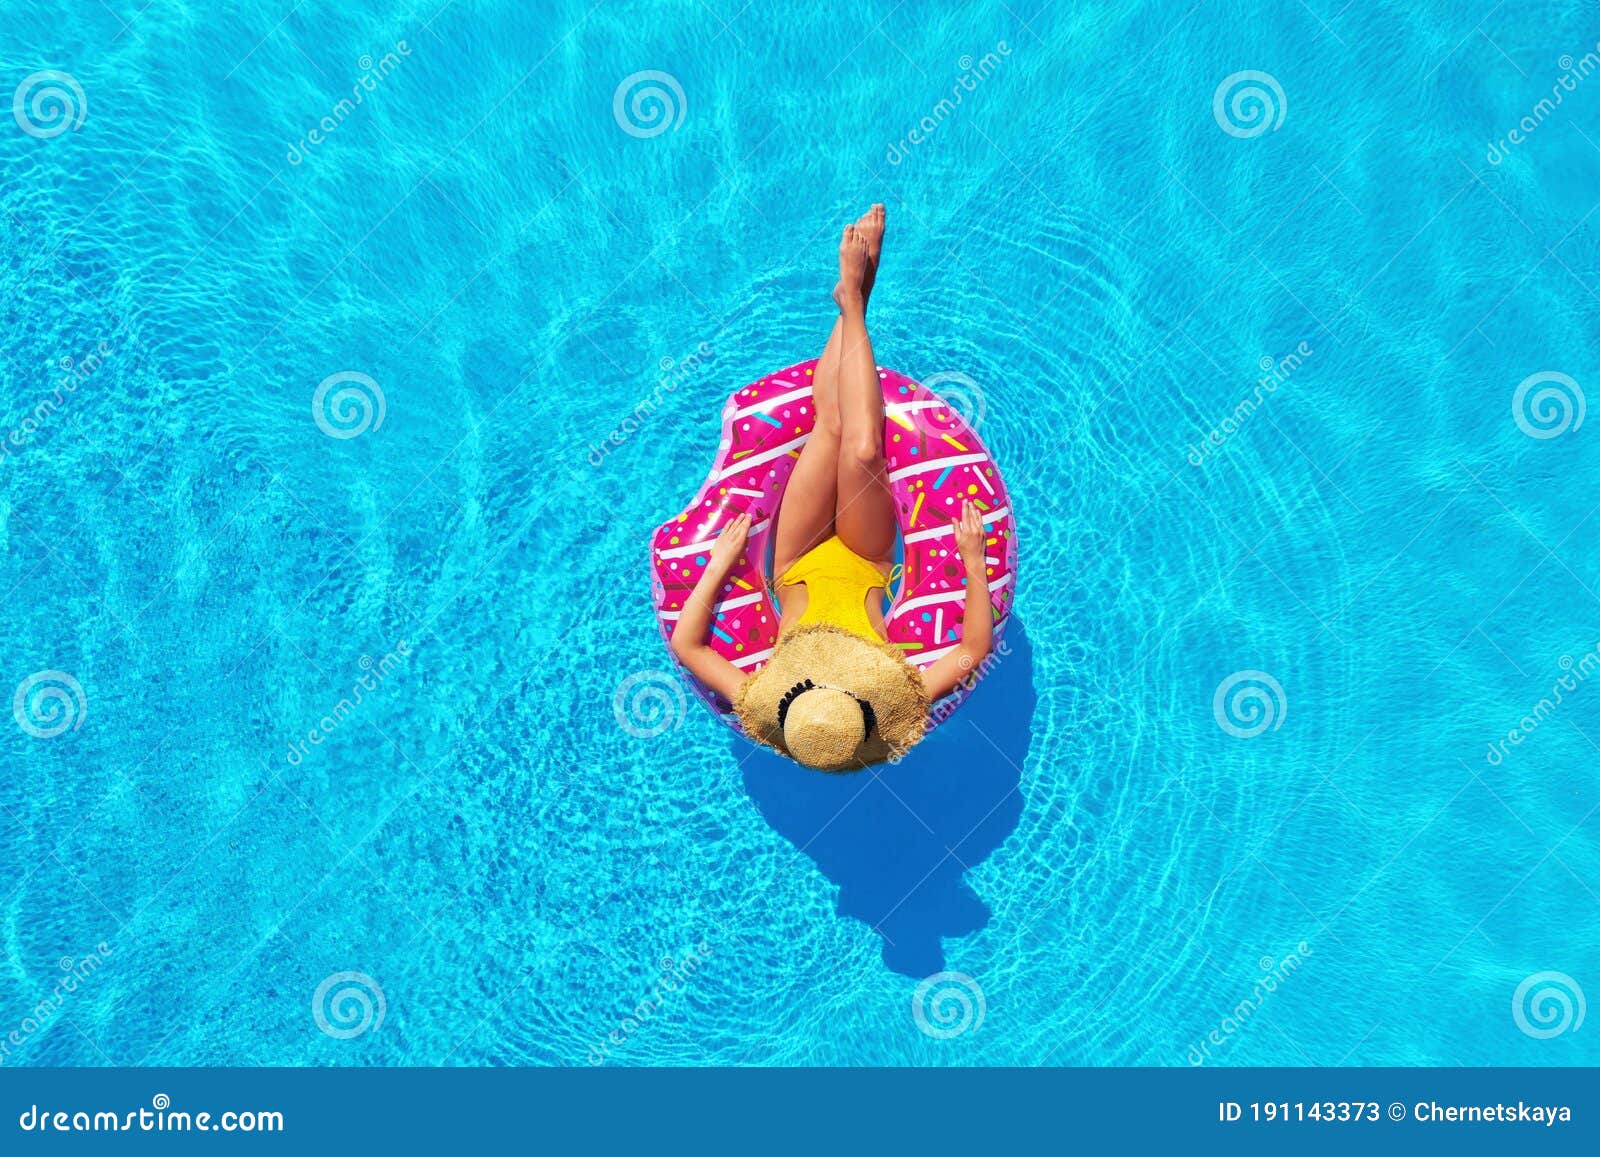 Young Woman with Inflatable Ring in Swimming Pool Stock Image - Image ...